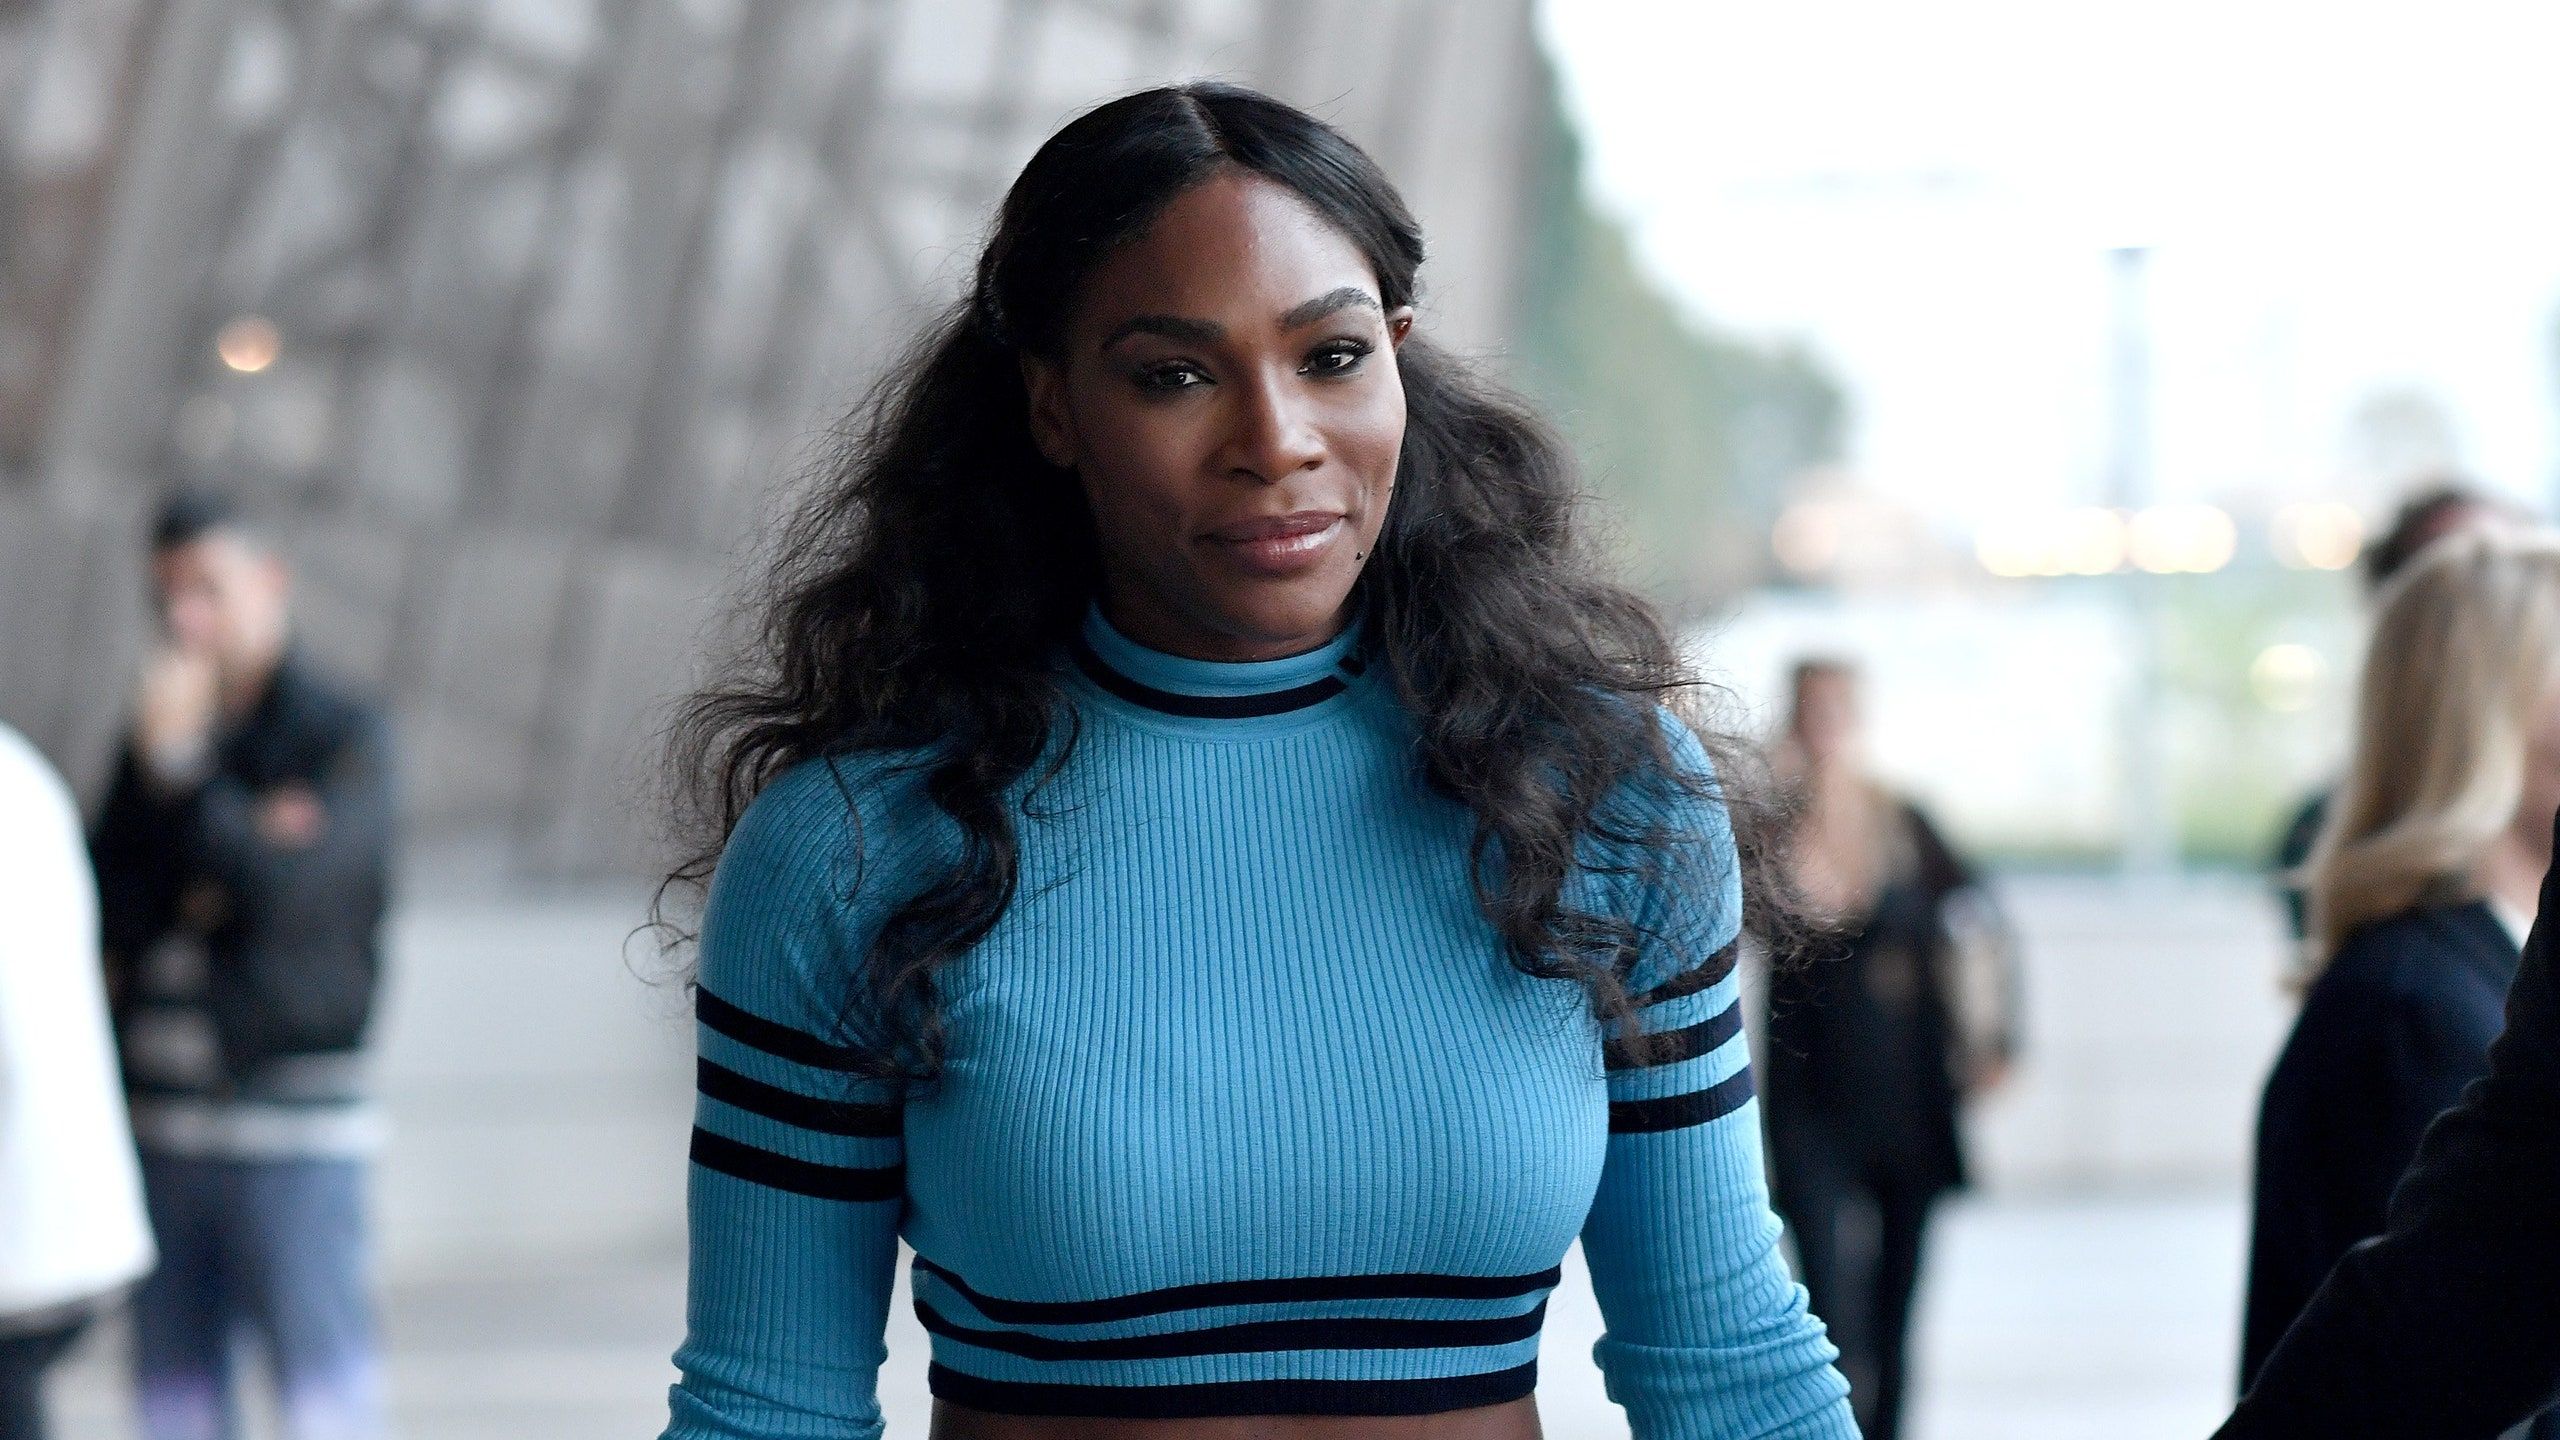 Serena Williams Wrote a Powerful Essay About How Black Women Can